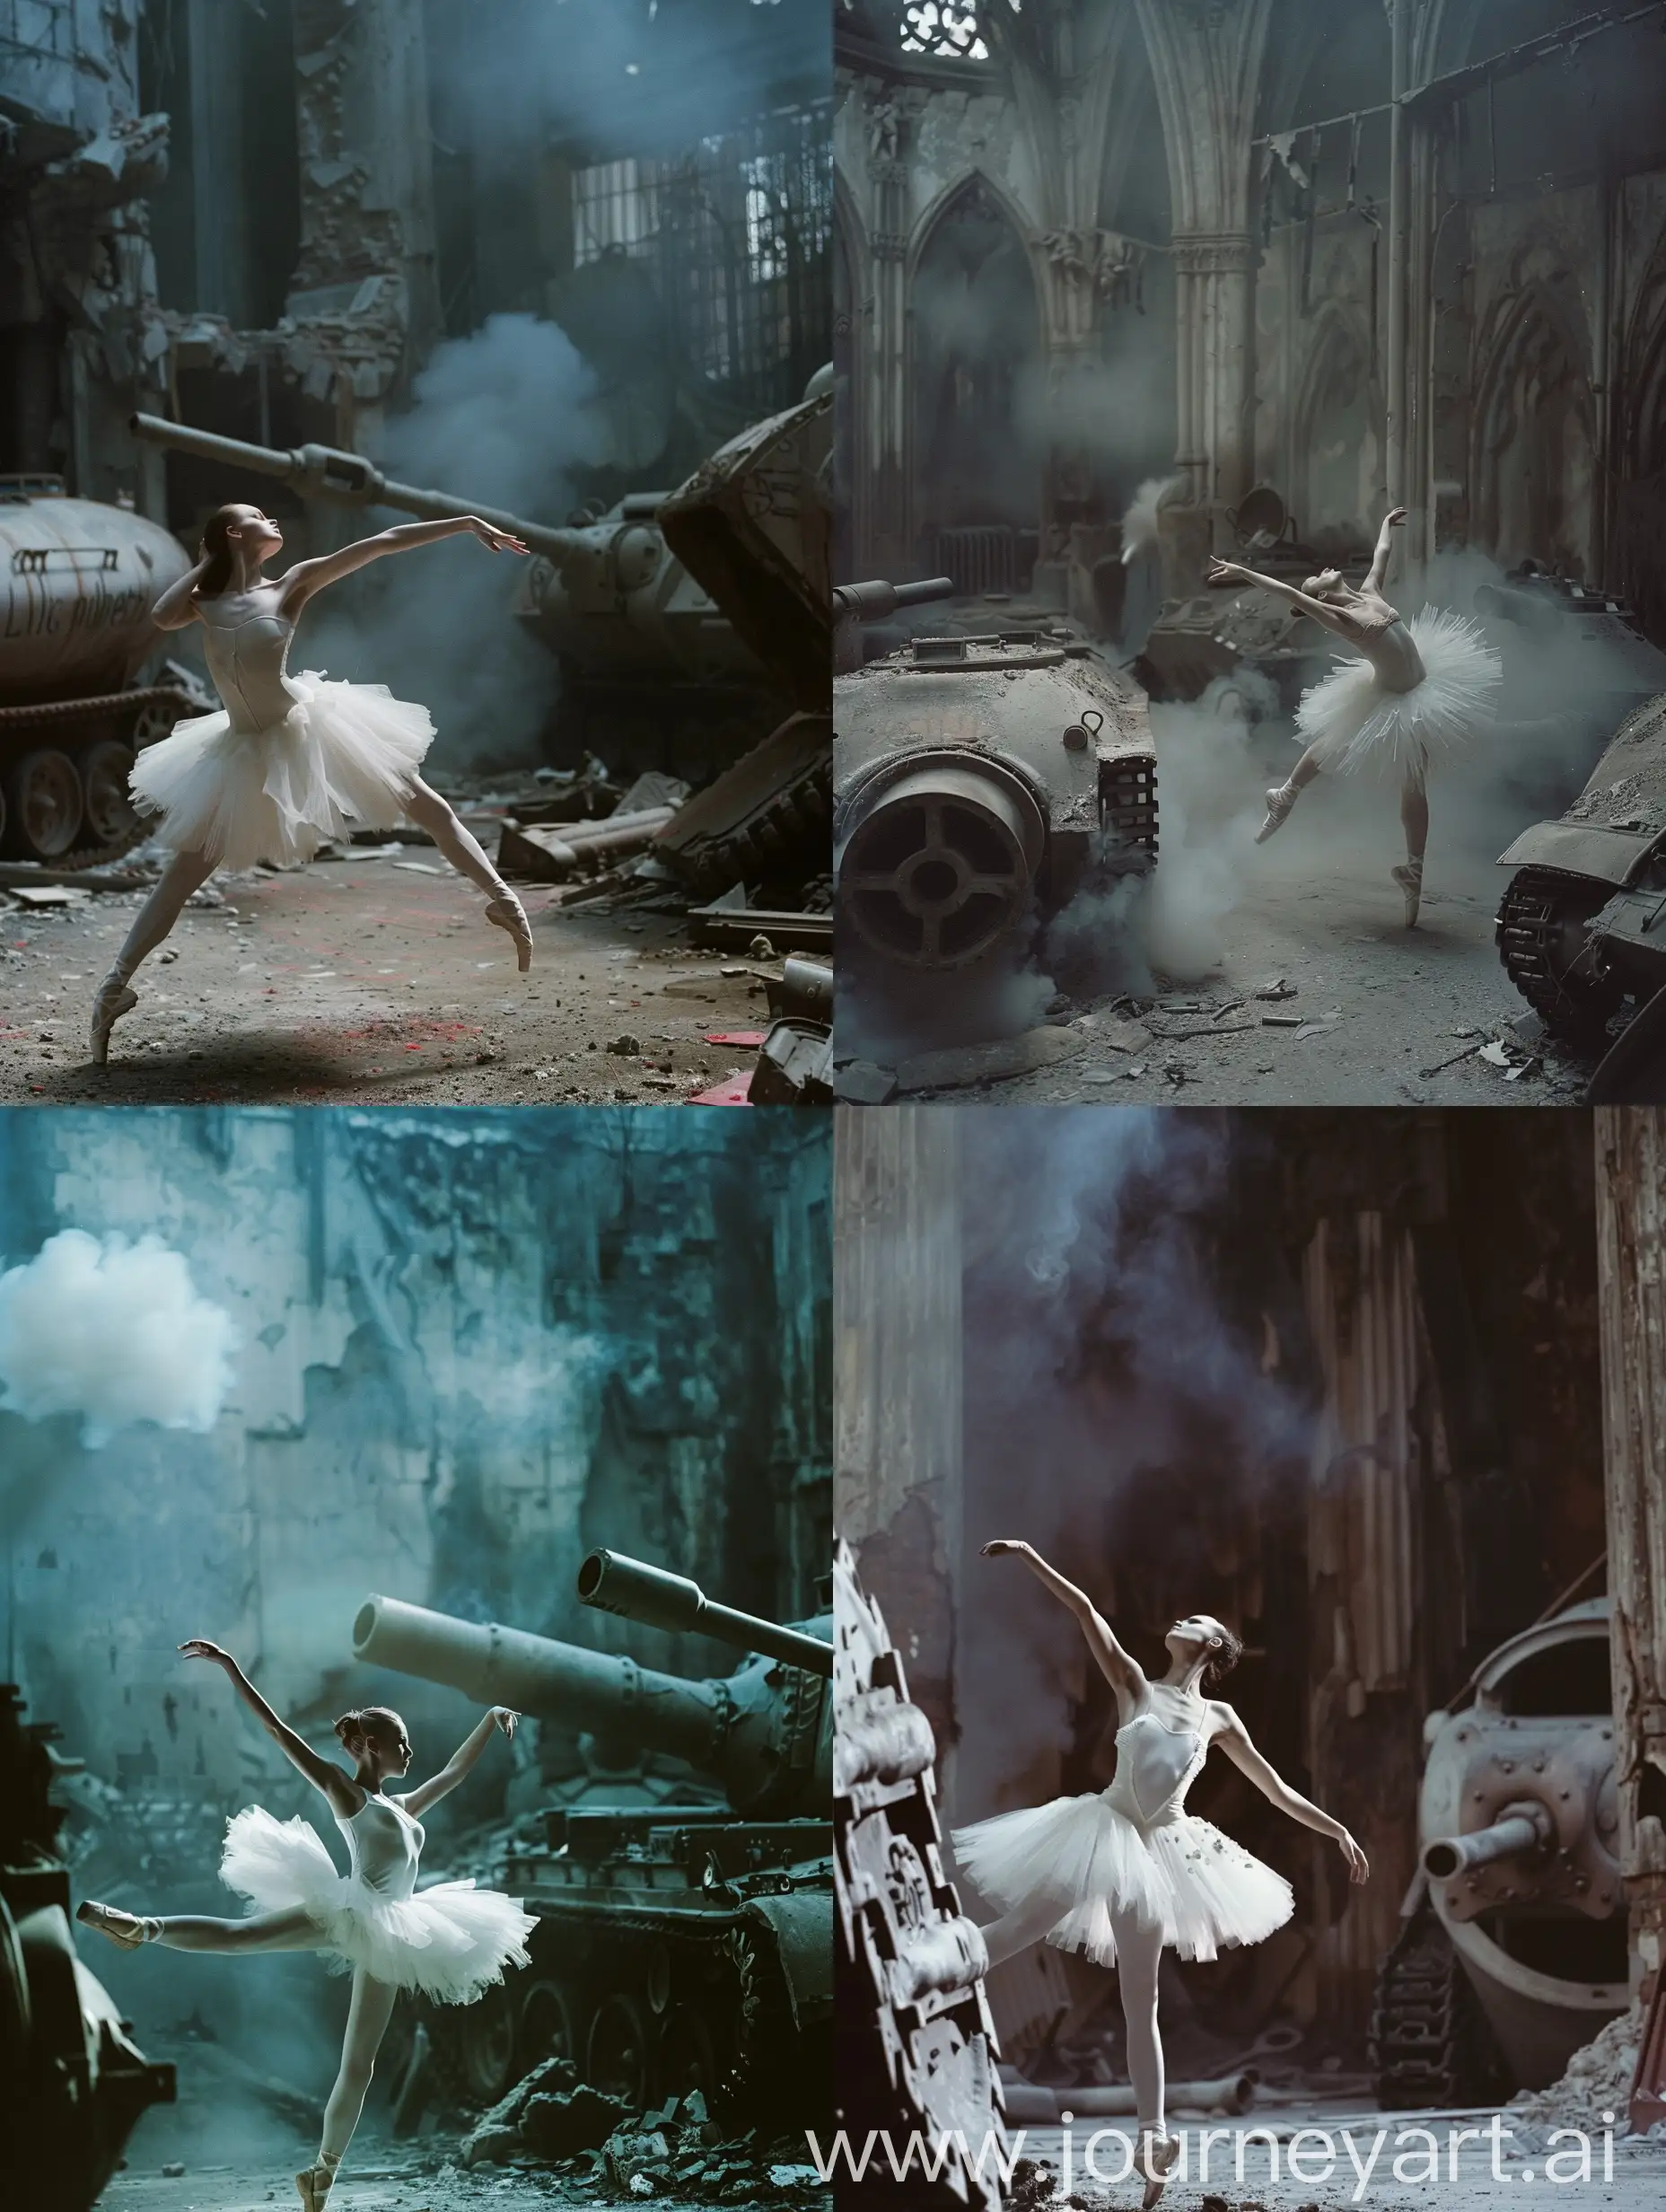 movie still frame Inspired by Steven Klein of decayed medieval sity interior, holga photography, cinema atmosphere. сломанные танки, танцующие балерины, sad pale white ballerina dancing in a dying , darkness smoke

